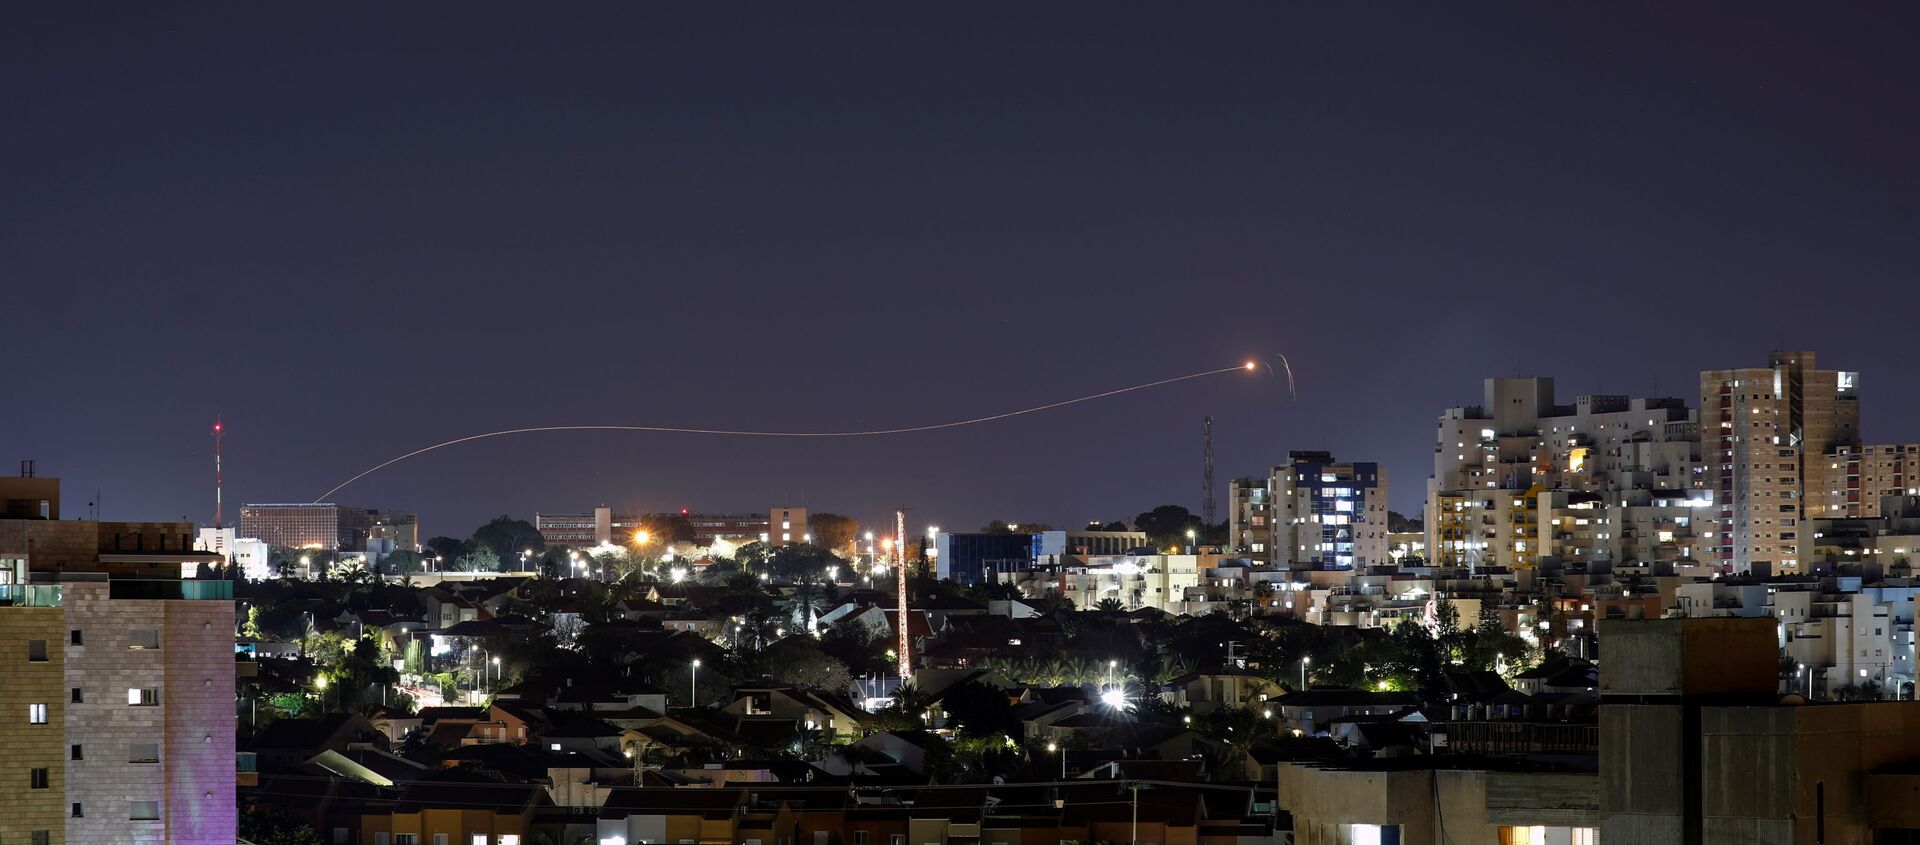 Iron Dome anti-missile system fires an interceptor missile as a rocket is launched from Gaza towards Israel, as seen from the city of Ashkelon, Israel April 24, 2021. - Sputnik International, 1920, 26.04.2021